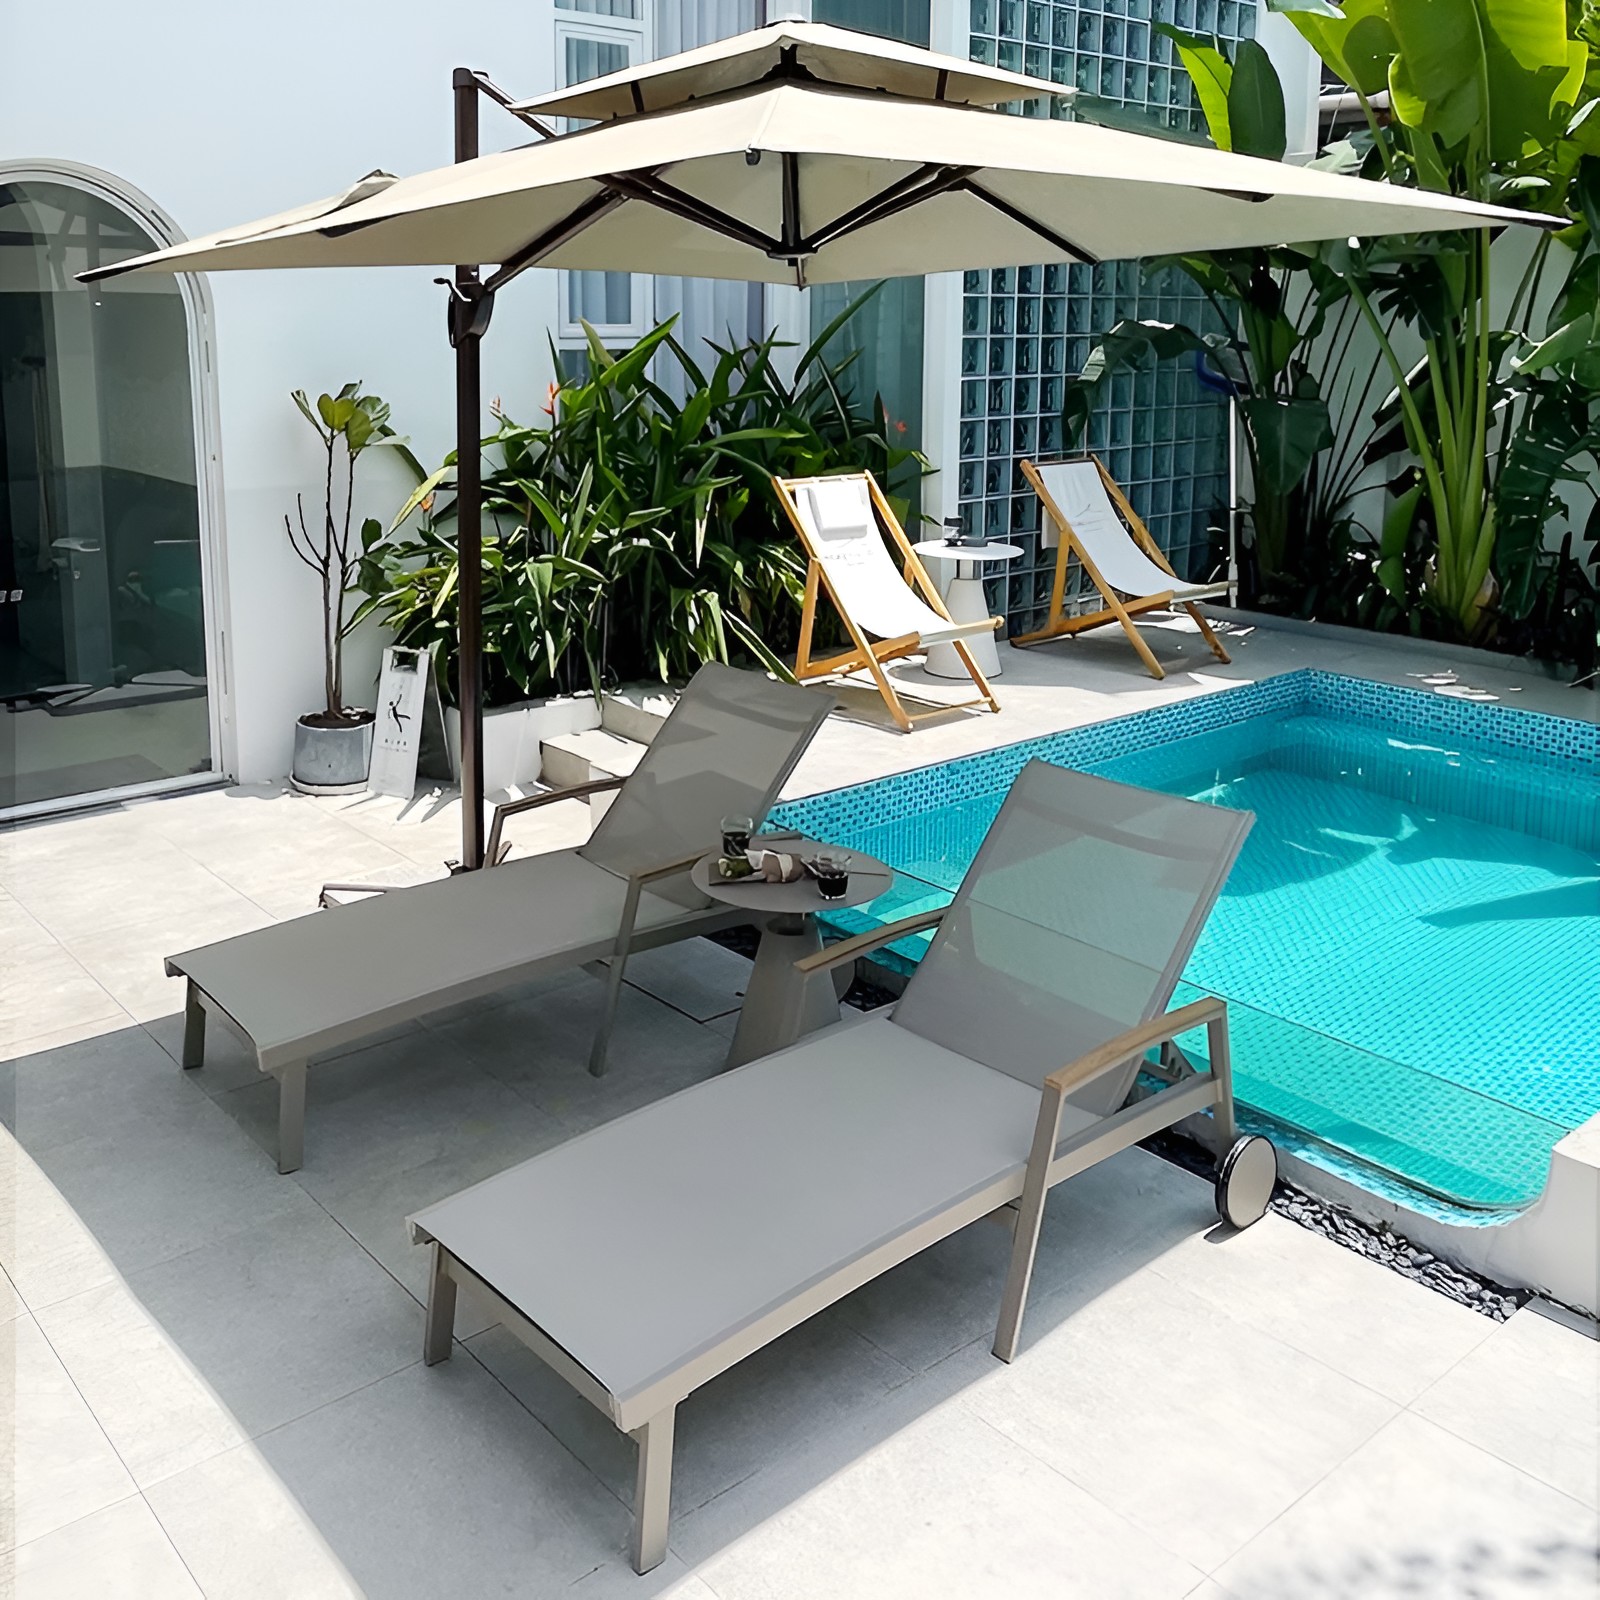 TY016 Sun Lounger Set with Parasol